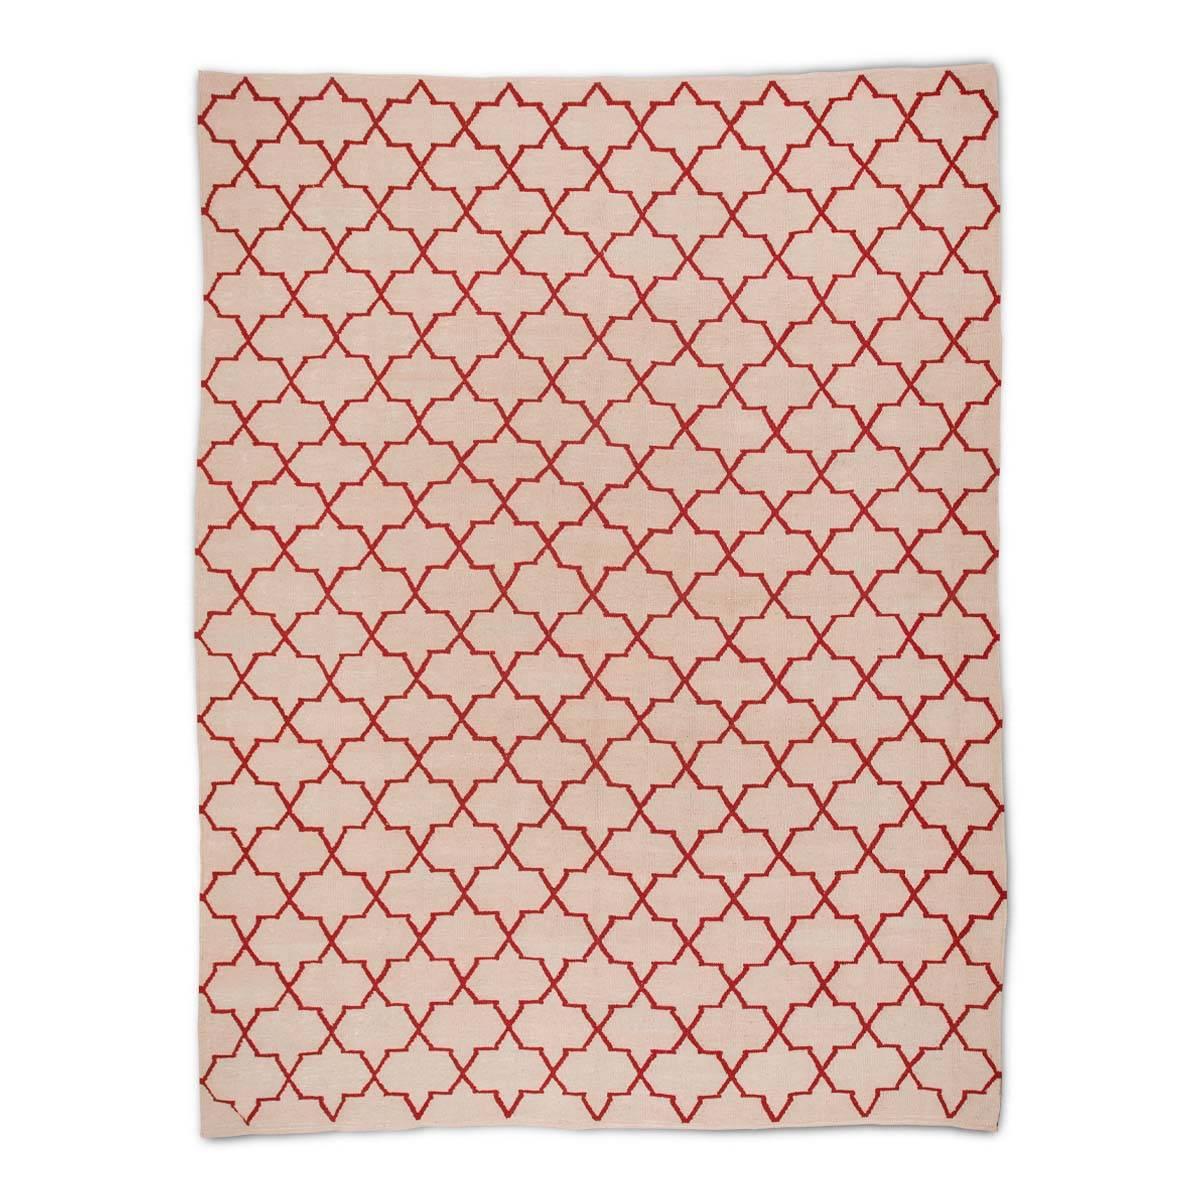 Kilim Contemporary Flat-Weave, Geometric Design over Red Shades